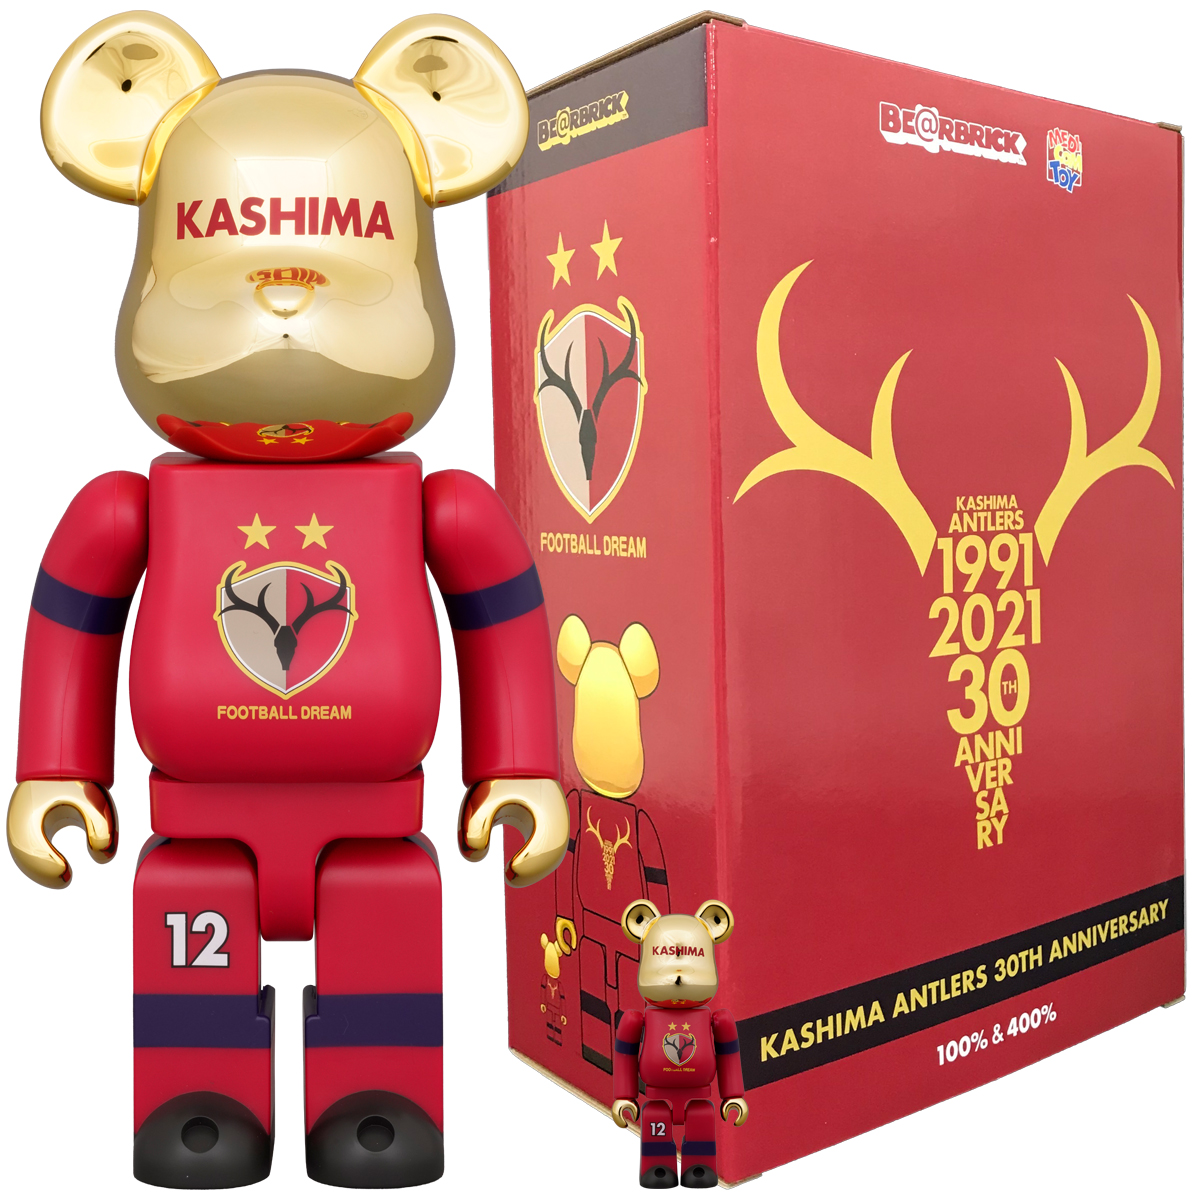 BE＠RBRICK KASHIMA ANTLERS 30th ANNIVERSARY 100%&400% | グッズ | 鹿島アントラーズ30